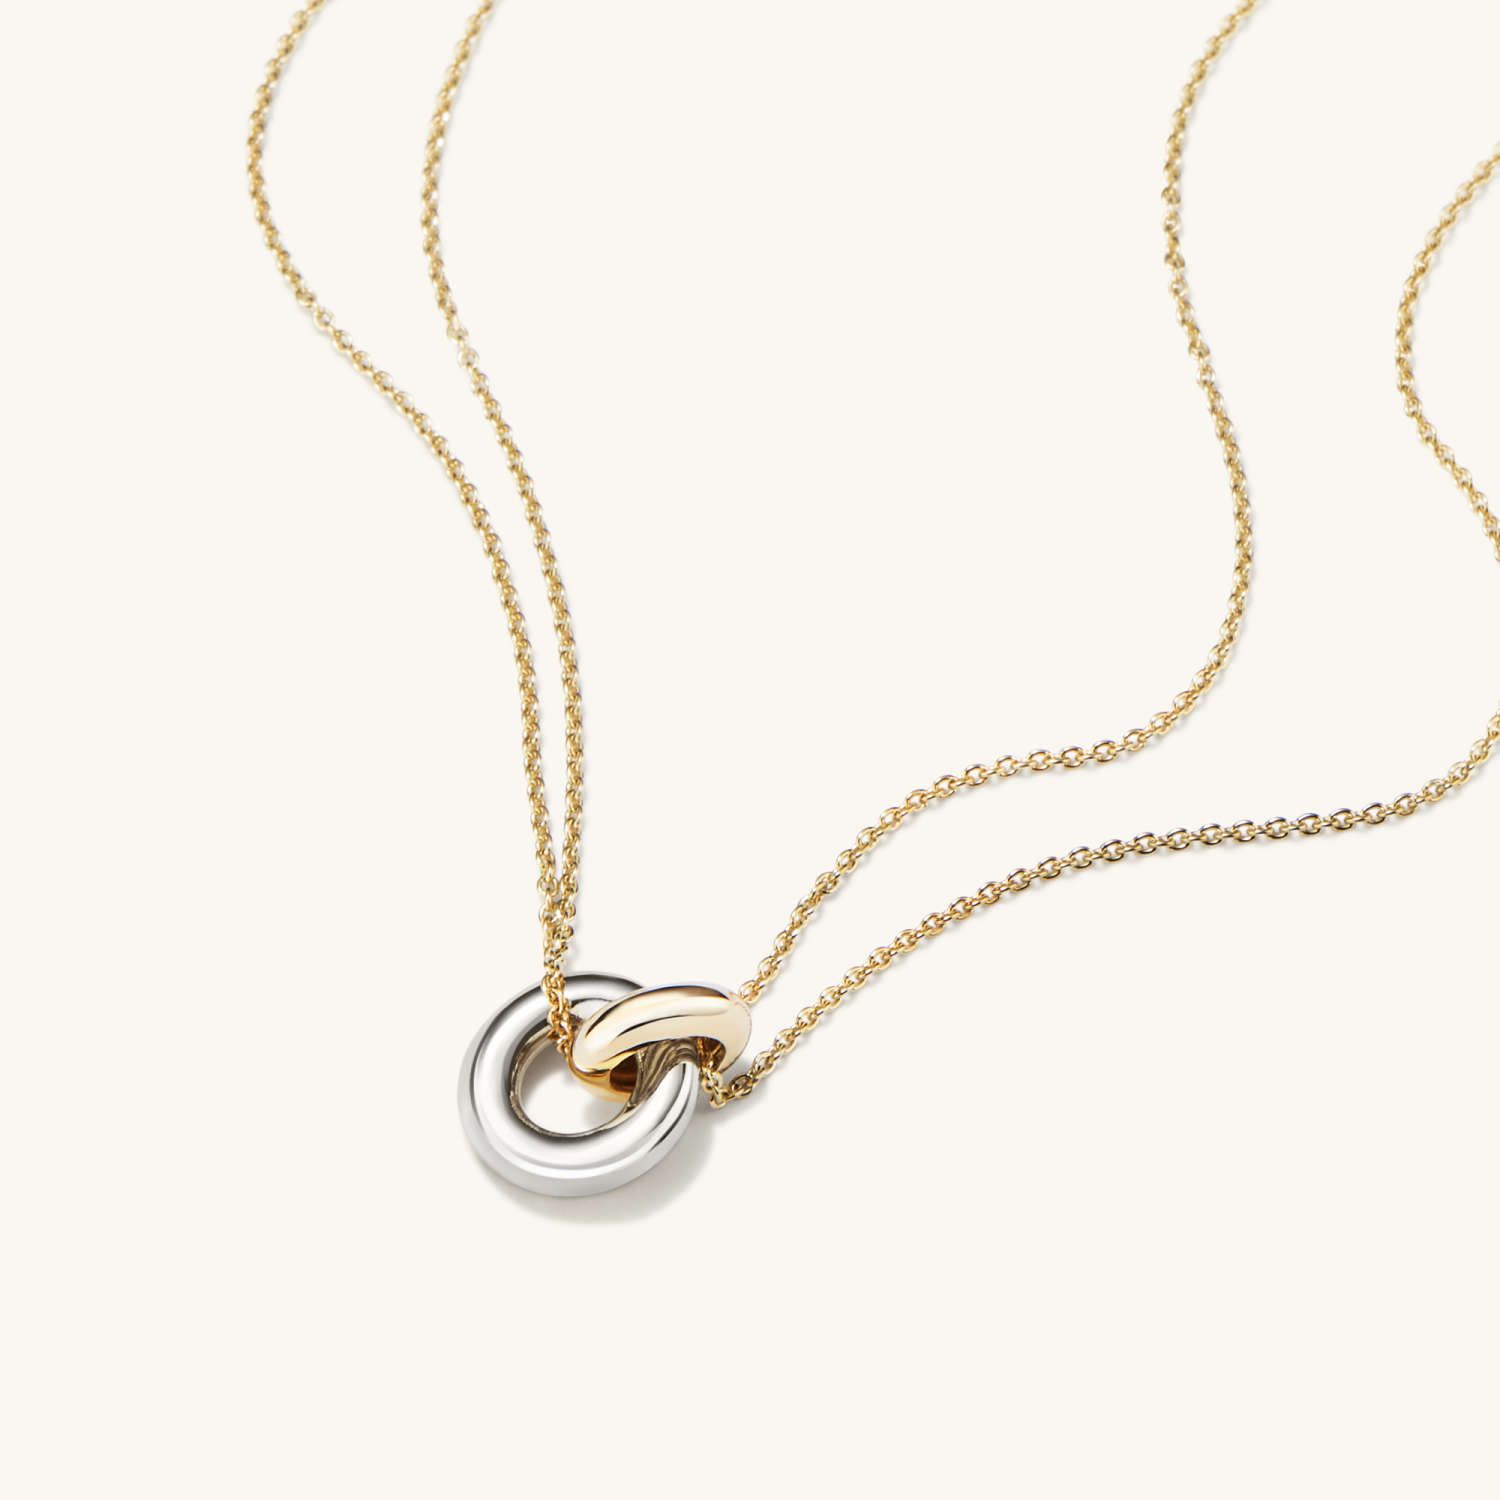 Linked Two-Tone Necklace - $148 | Mejuri (Global)